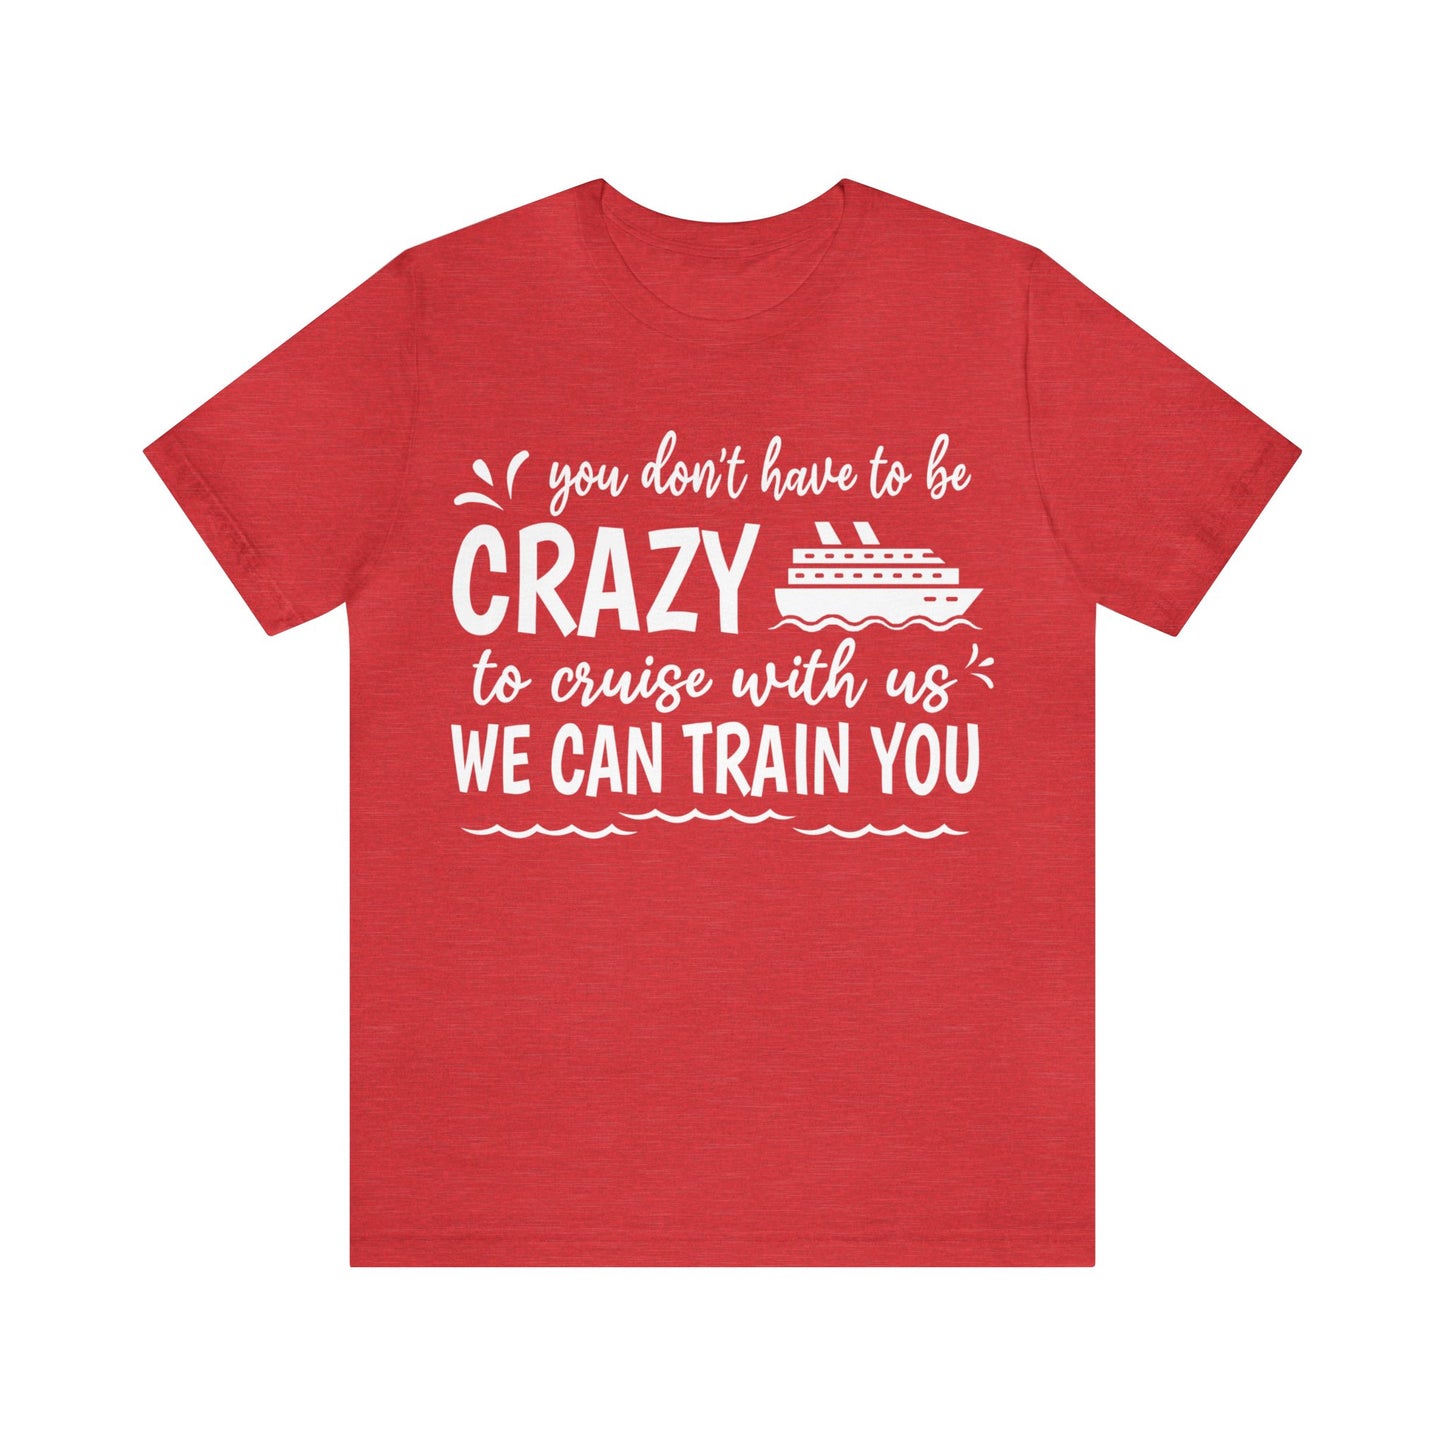 You don't have to be CRAZY to cruise with us We can train you Shirt in Heather Red